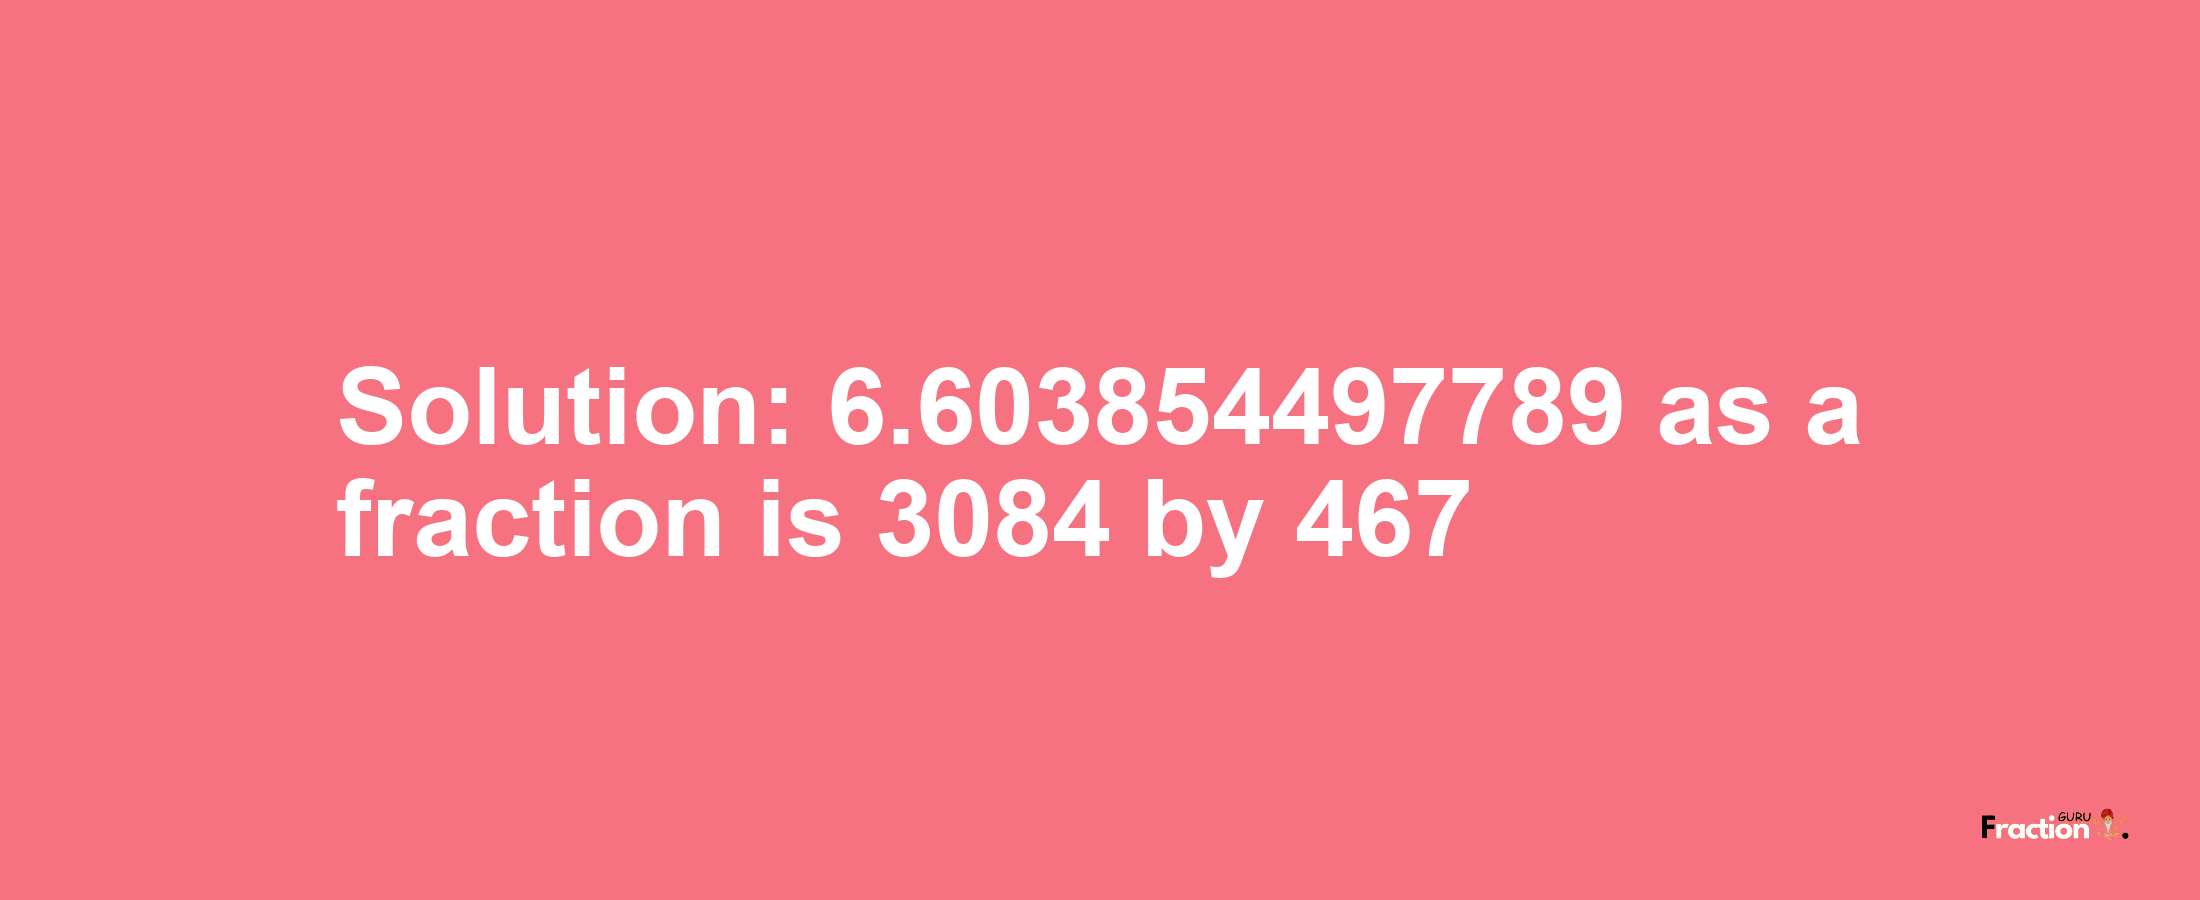 Solution:6.603854497789 as a fraction is 3084/467